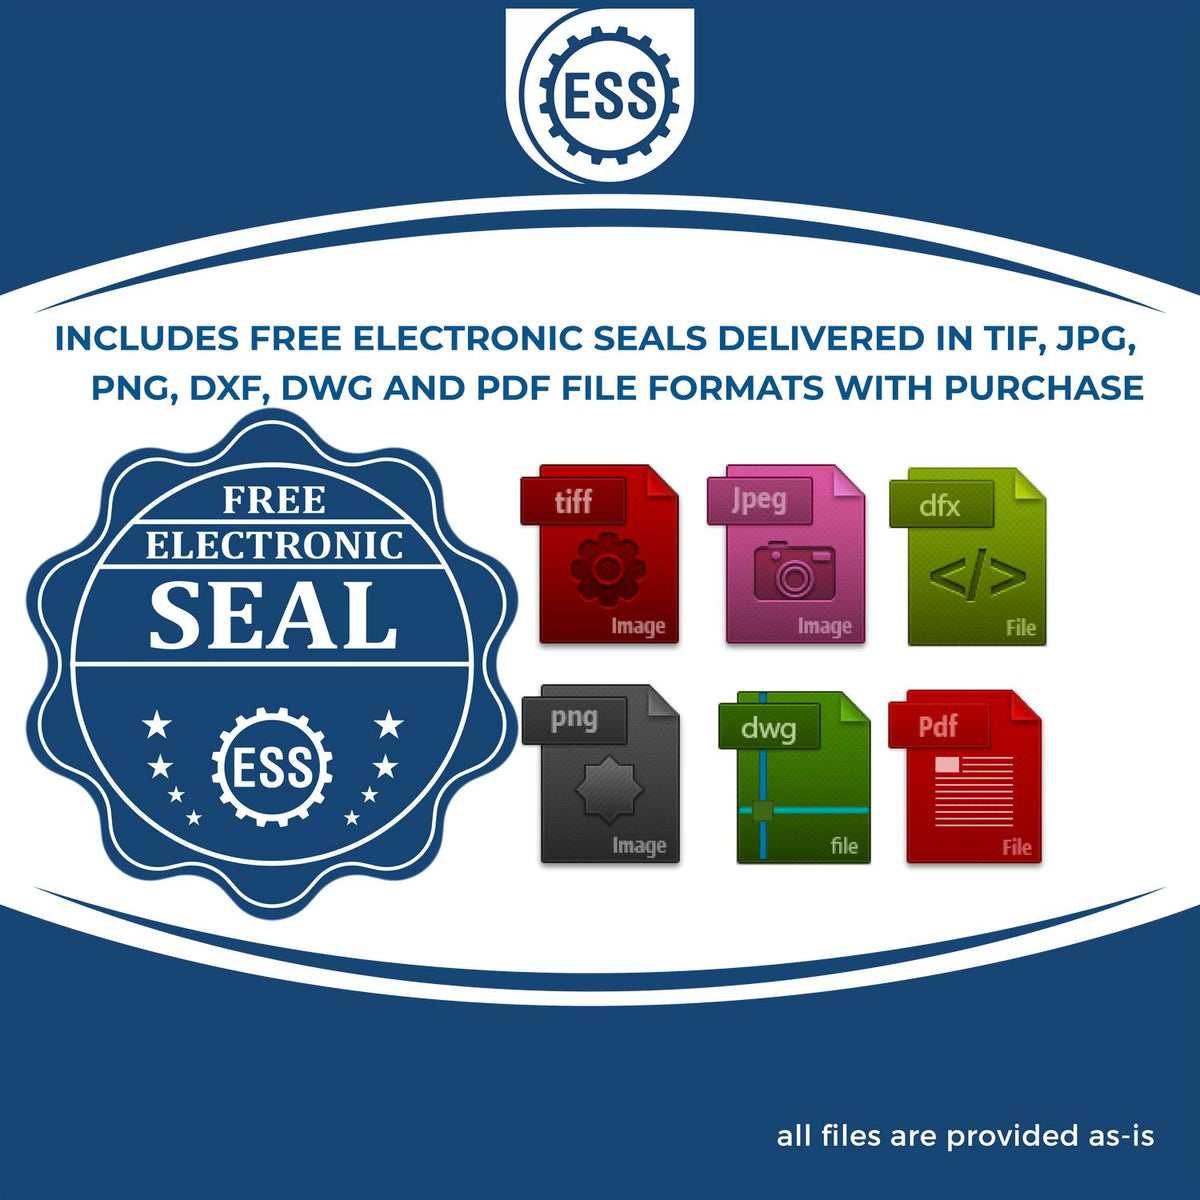 An infographic for the free electronic seal for the MaxLight Premium Pre-Inked Washington Rectangular Notarial Stamp illustrating the different file type icons such as DXF, DWG, TIF, JPG and PNG.